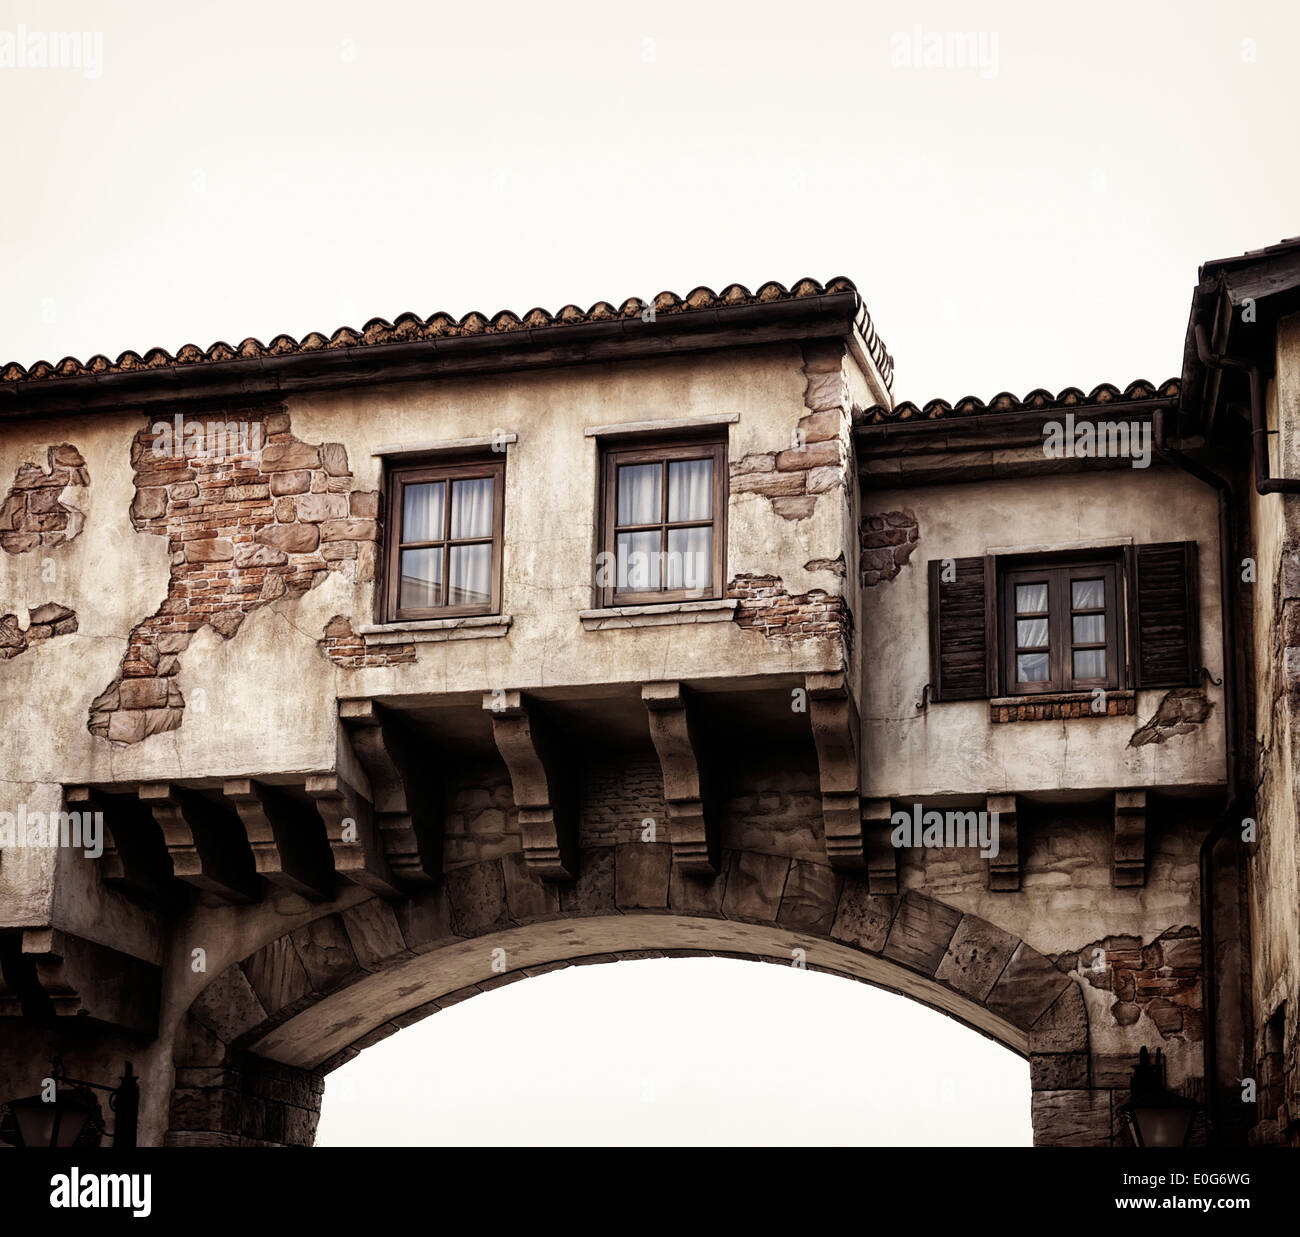 Old rustic gate house, antique architecture in Venetian style Stock Photo